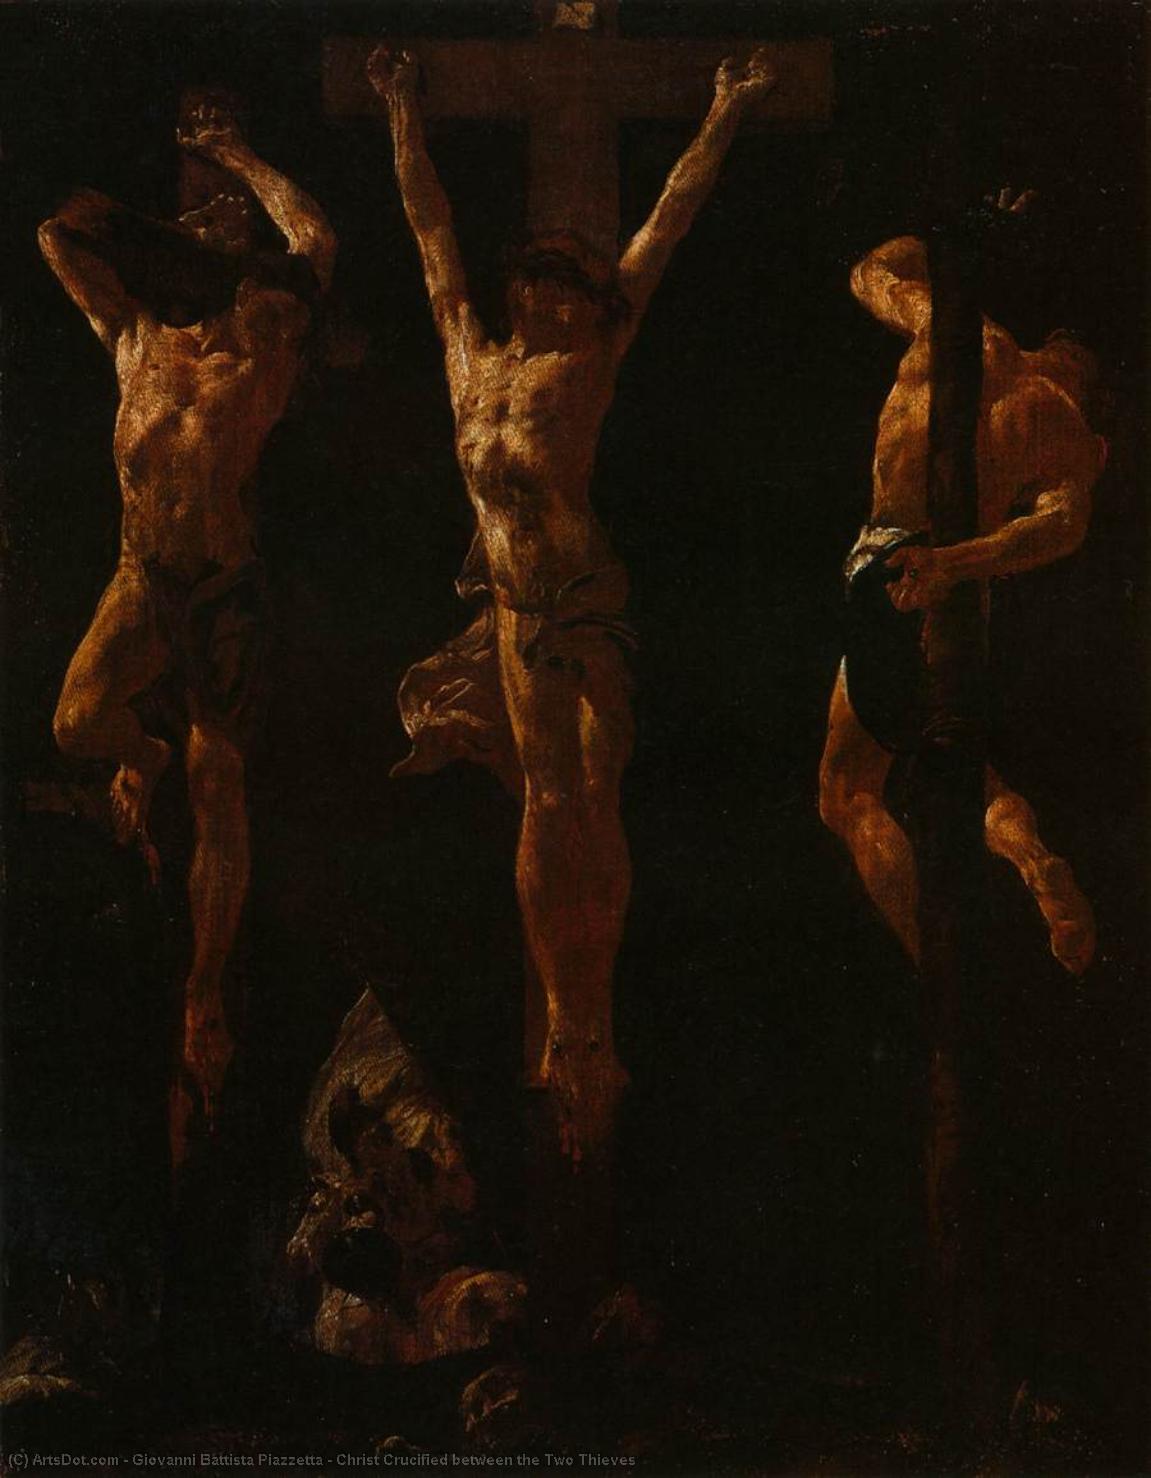 WikiOO.org - 백과 사전 - 회화, 삽화 Giovanni Battista Piazzetta - Christ Crucified between the Two Thieves